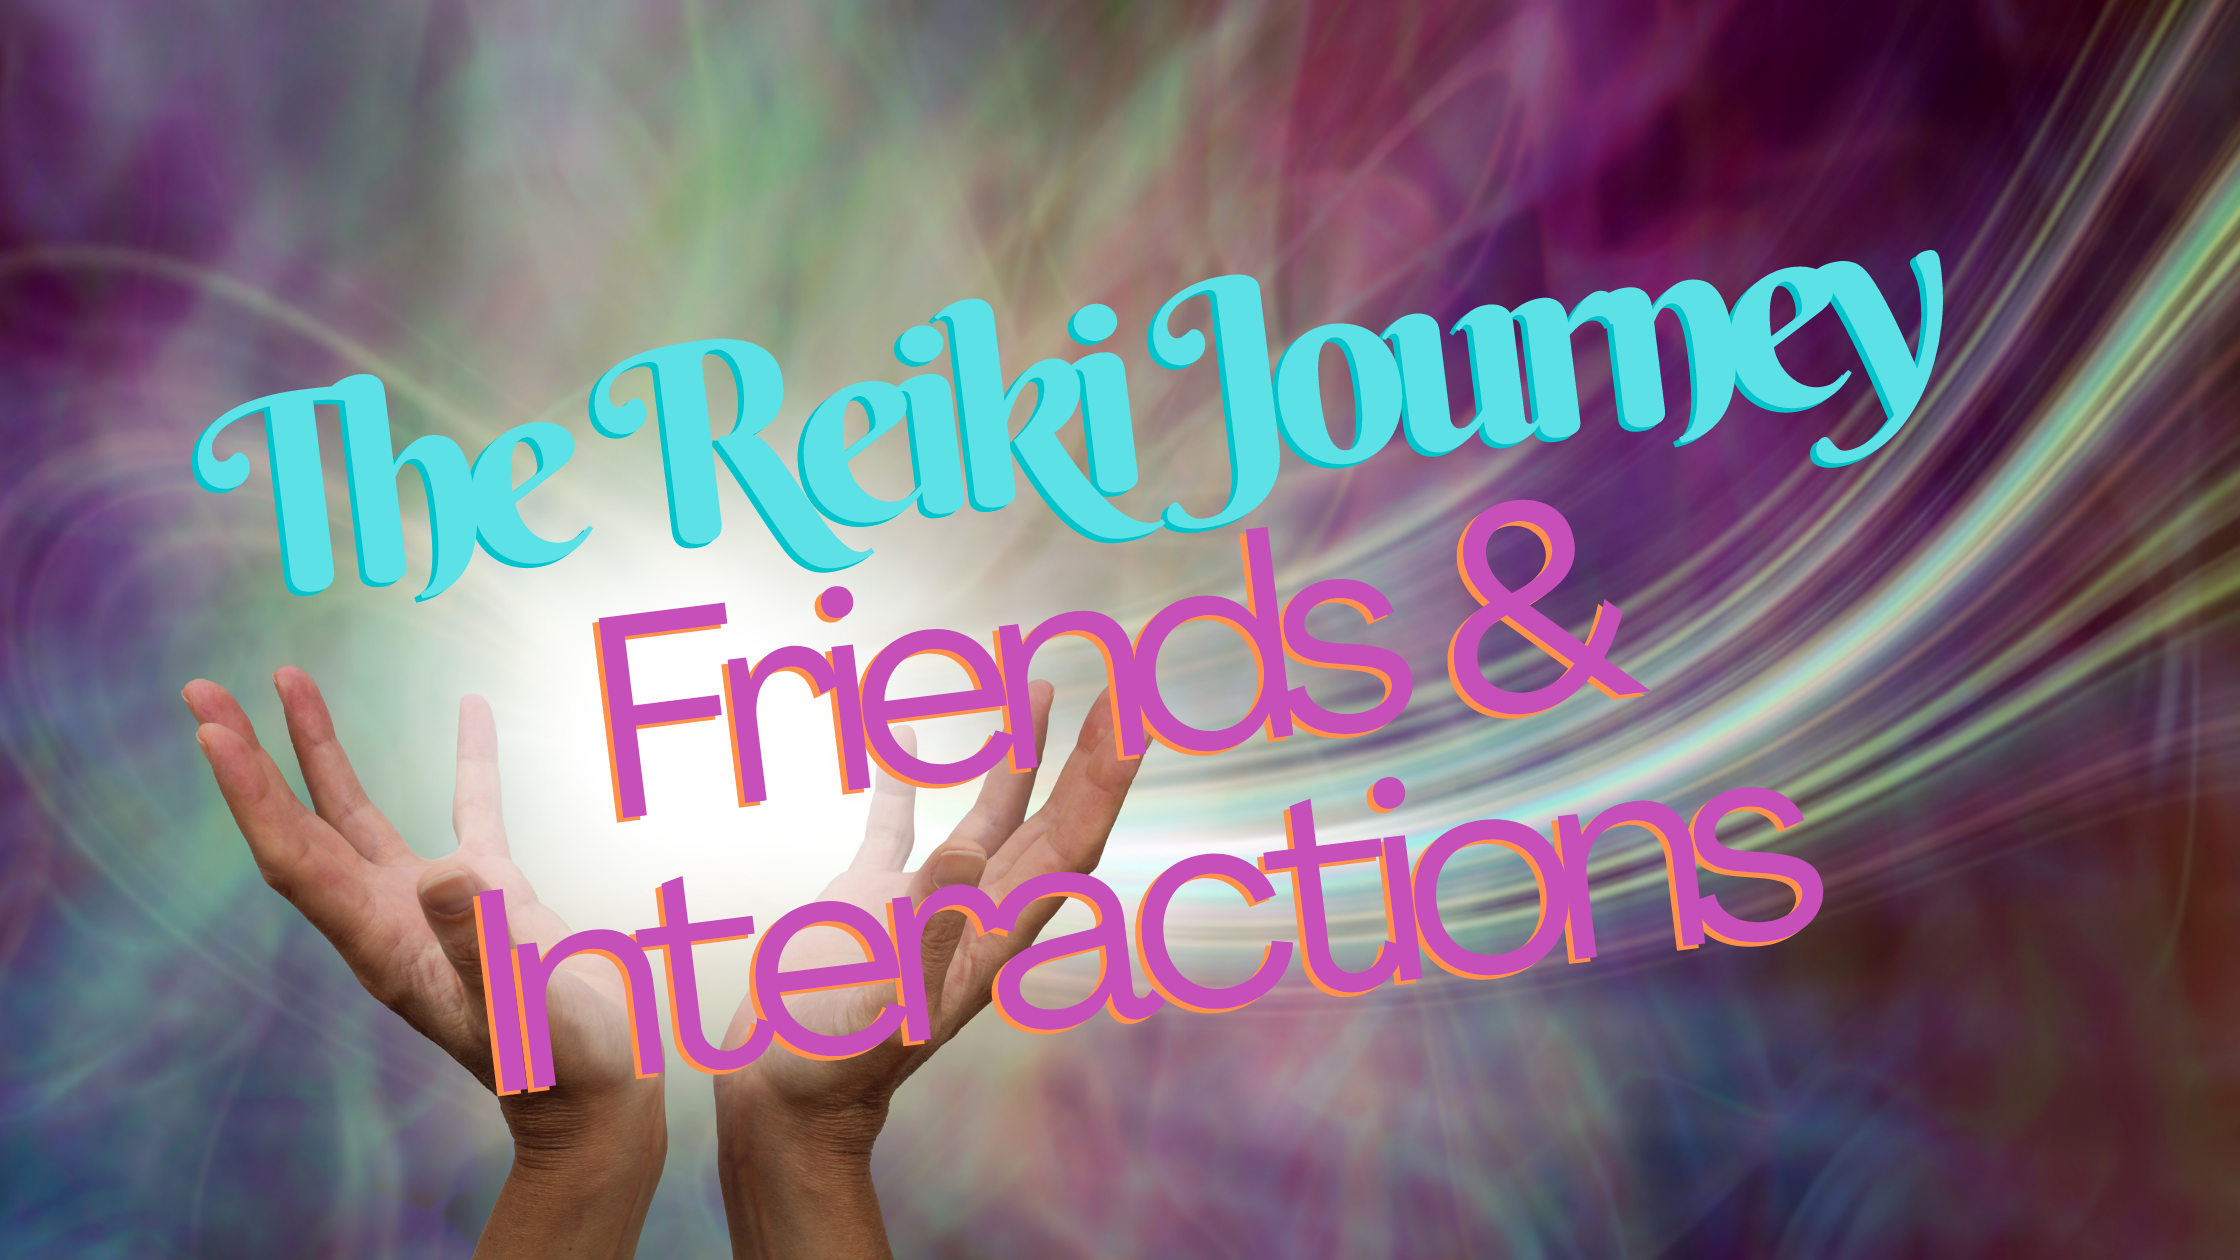 The Reiki Journey: Friends and Interactions